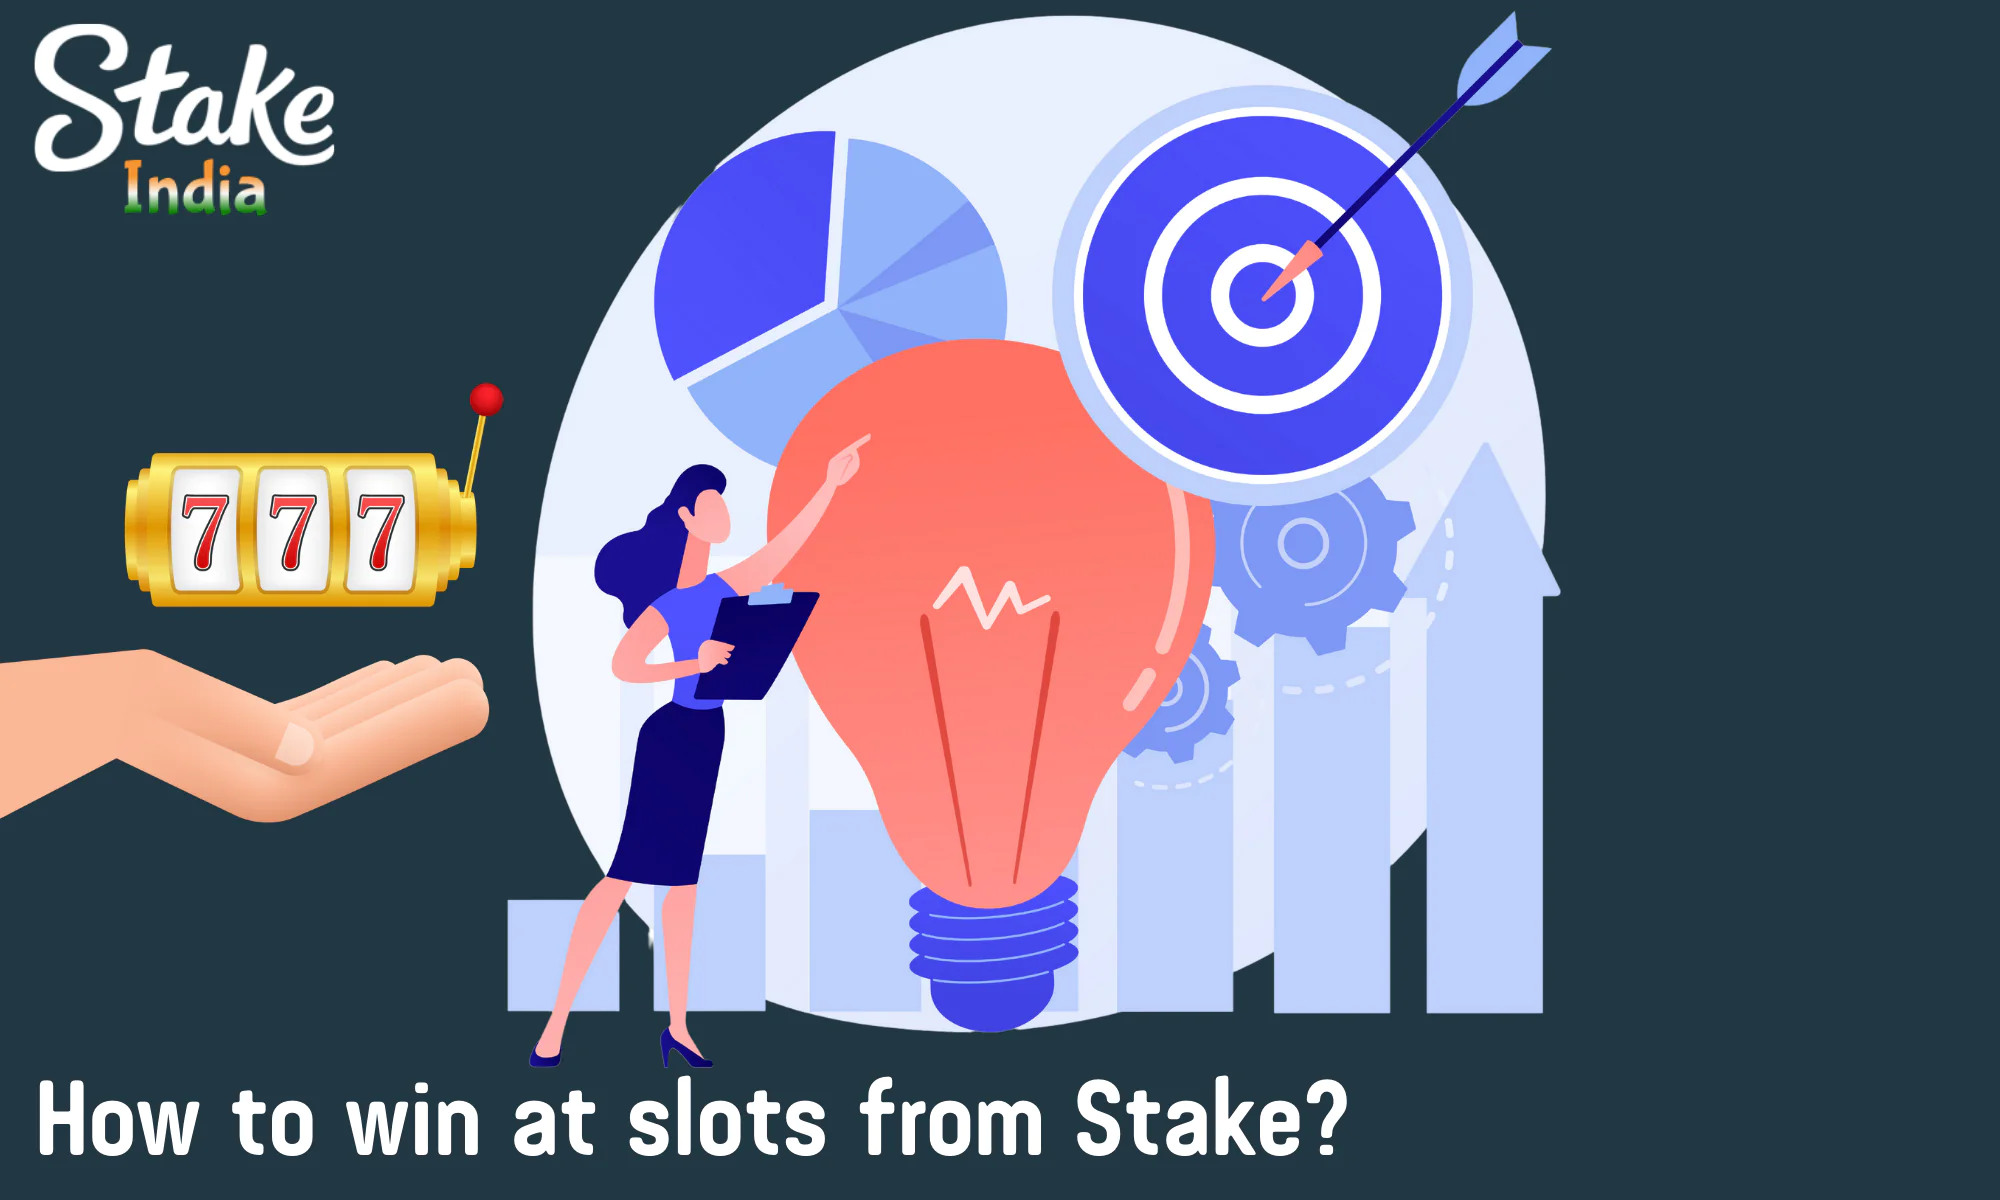 Strategies to win when playing slots on the Stake website